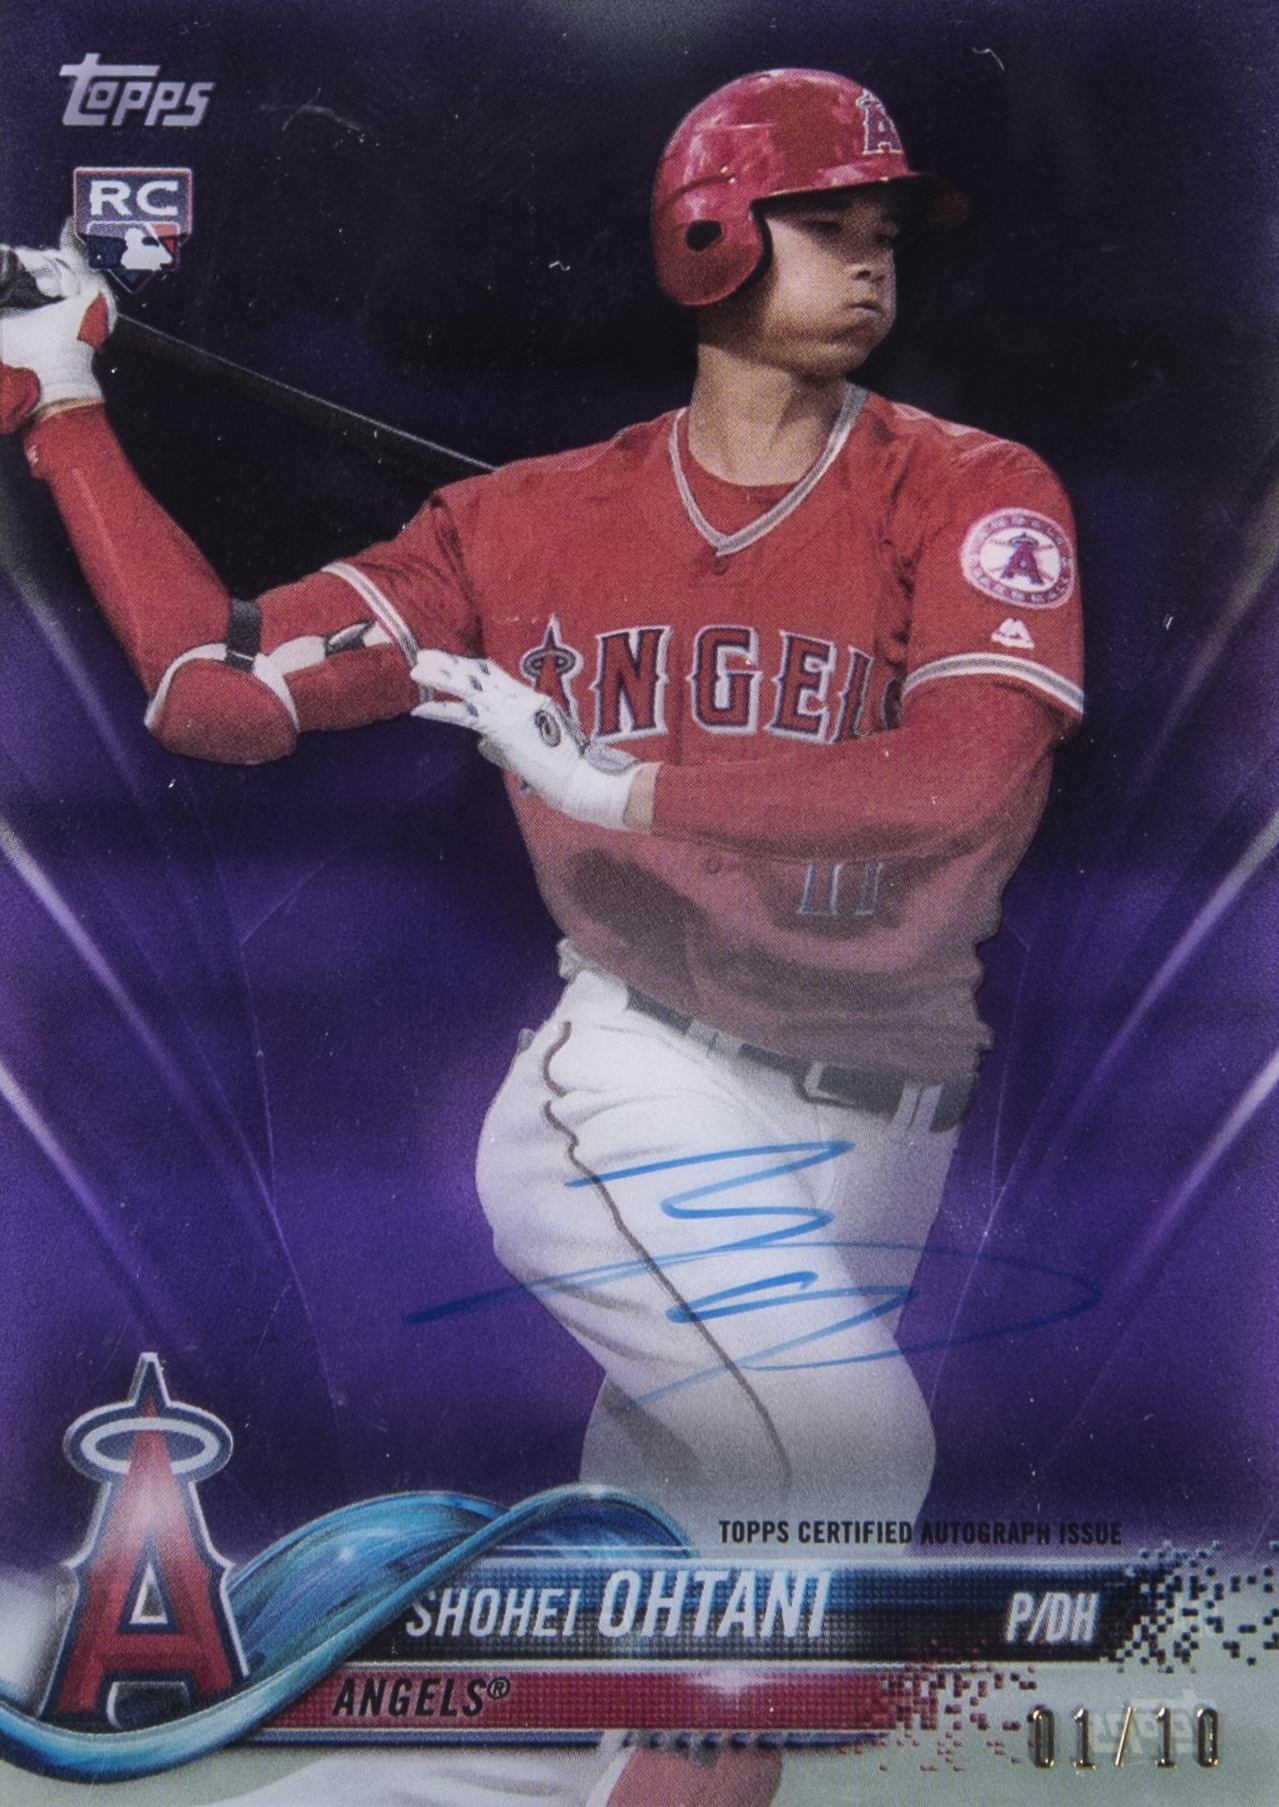 2018 Topps Clearly Authentic Shohei Ohtani #SO Baseball Card